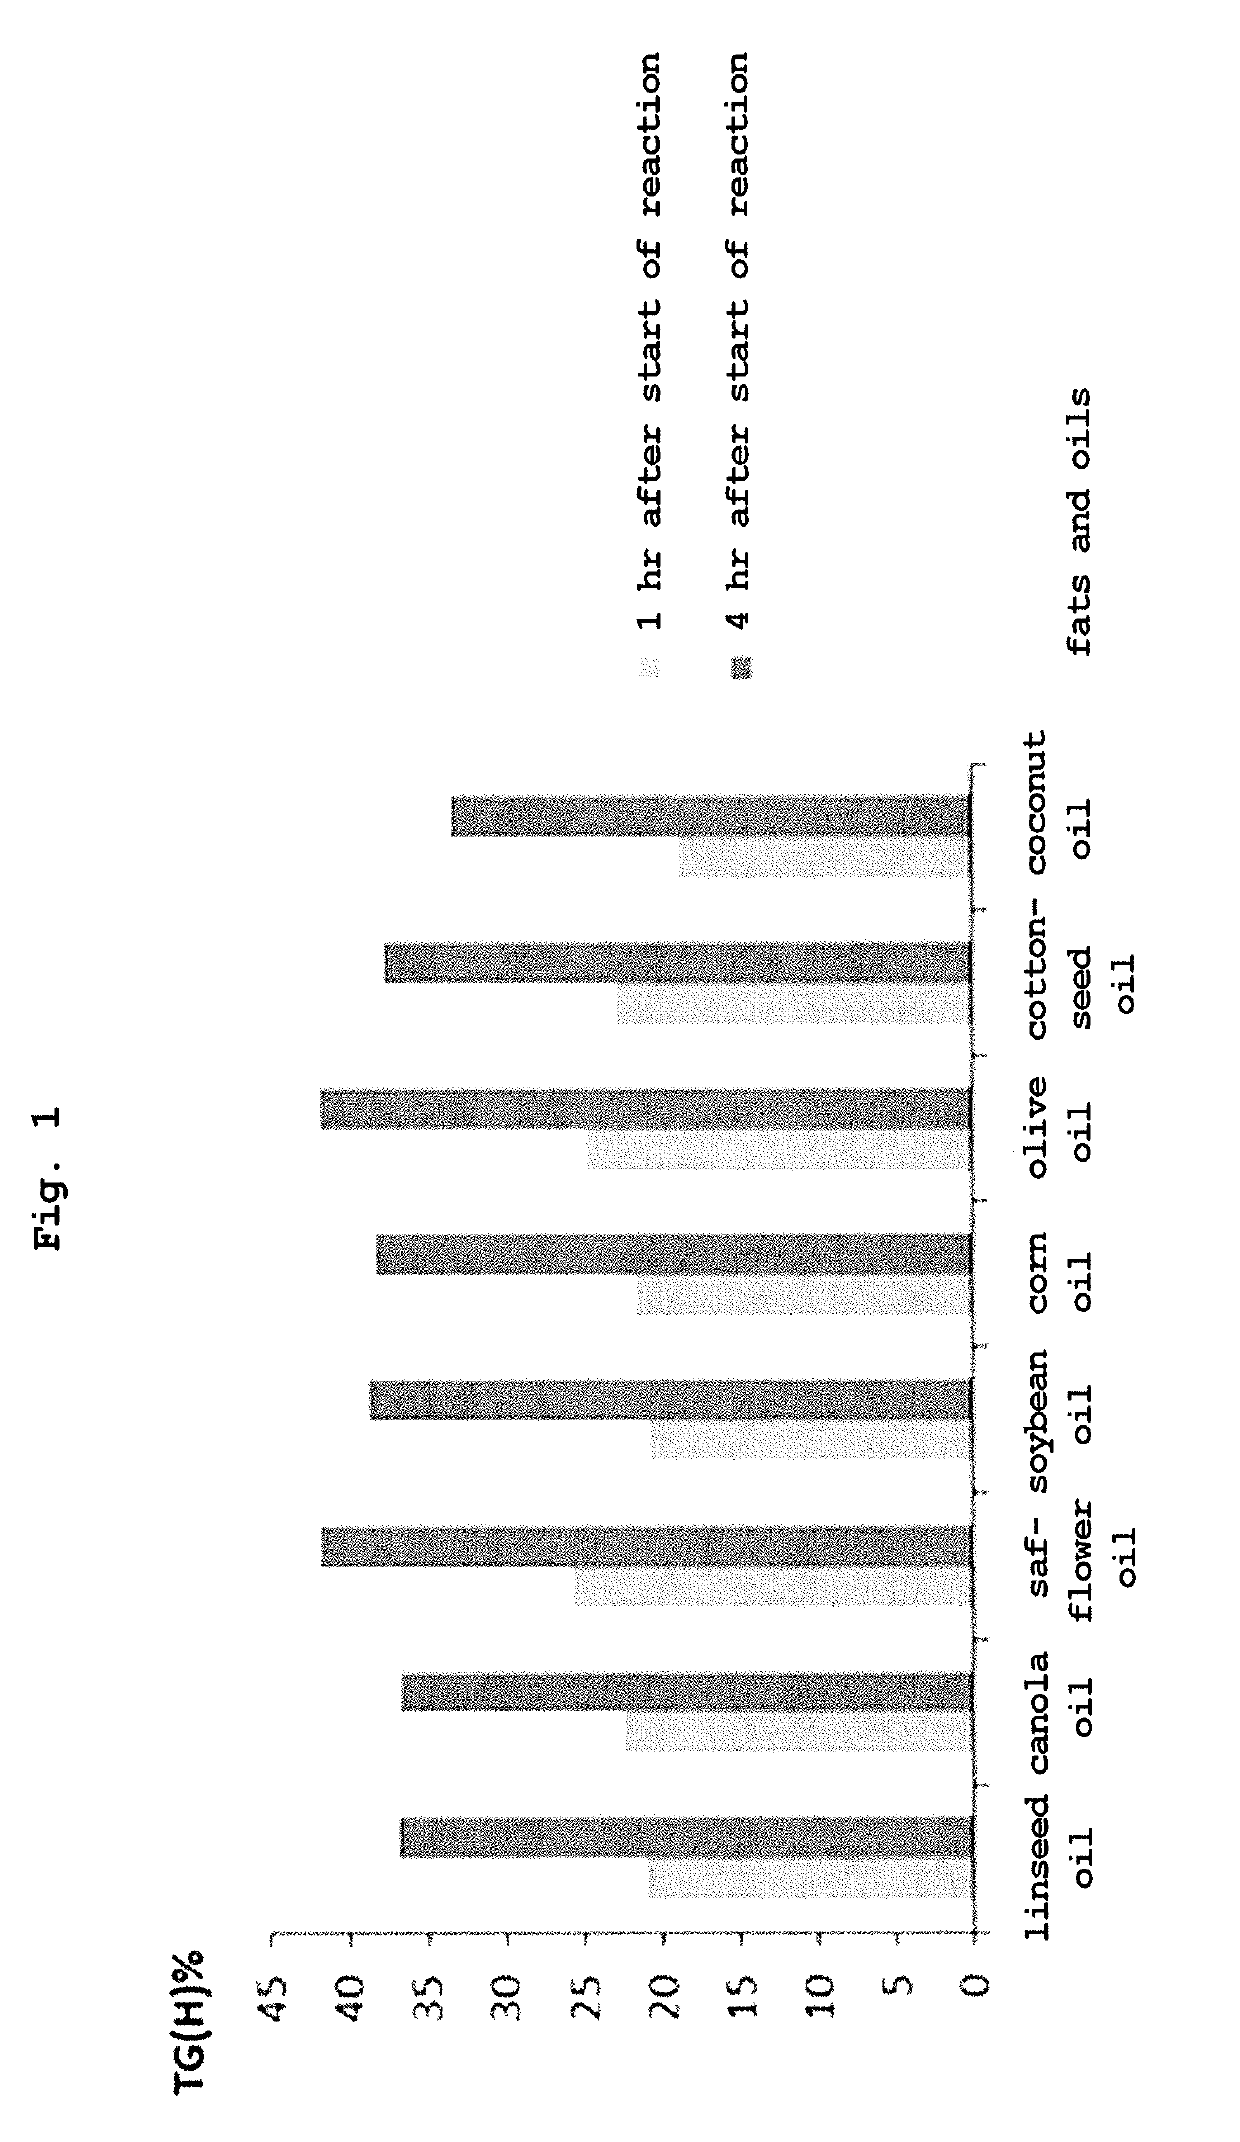 Triglyceride and use thereof